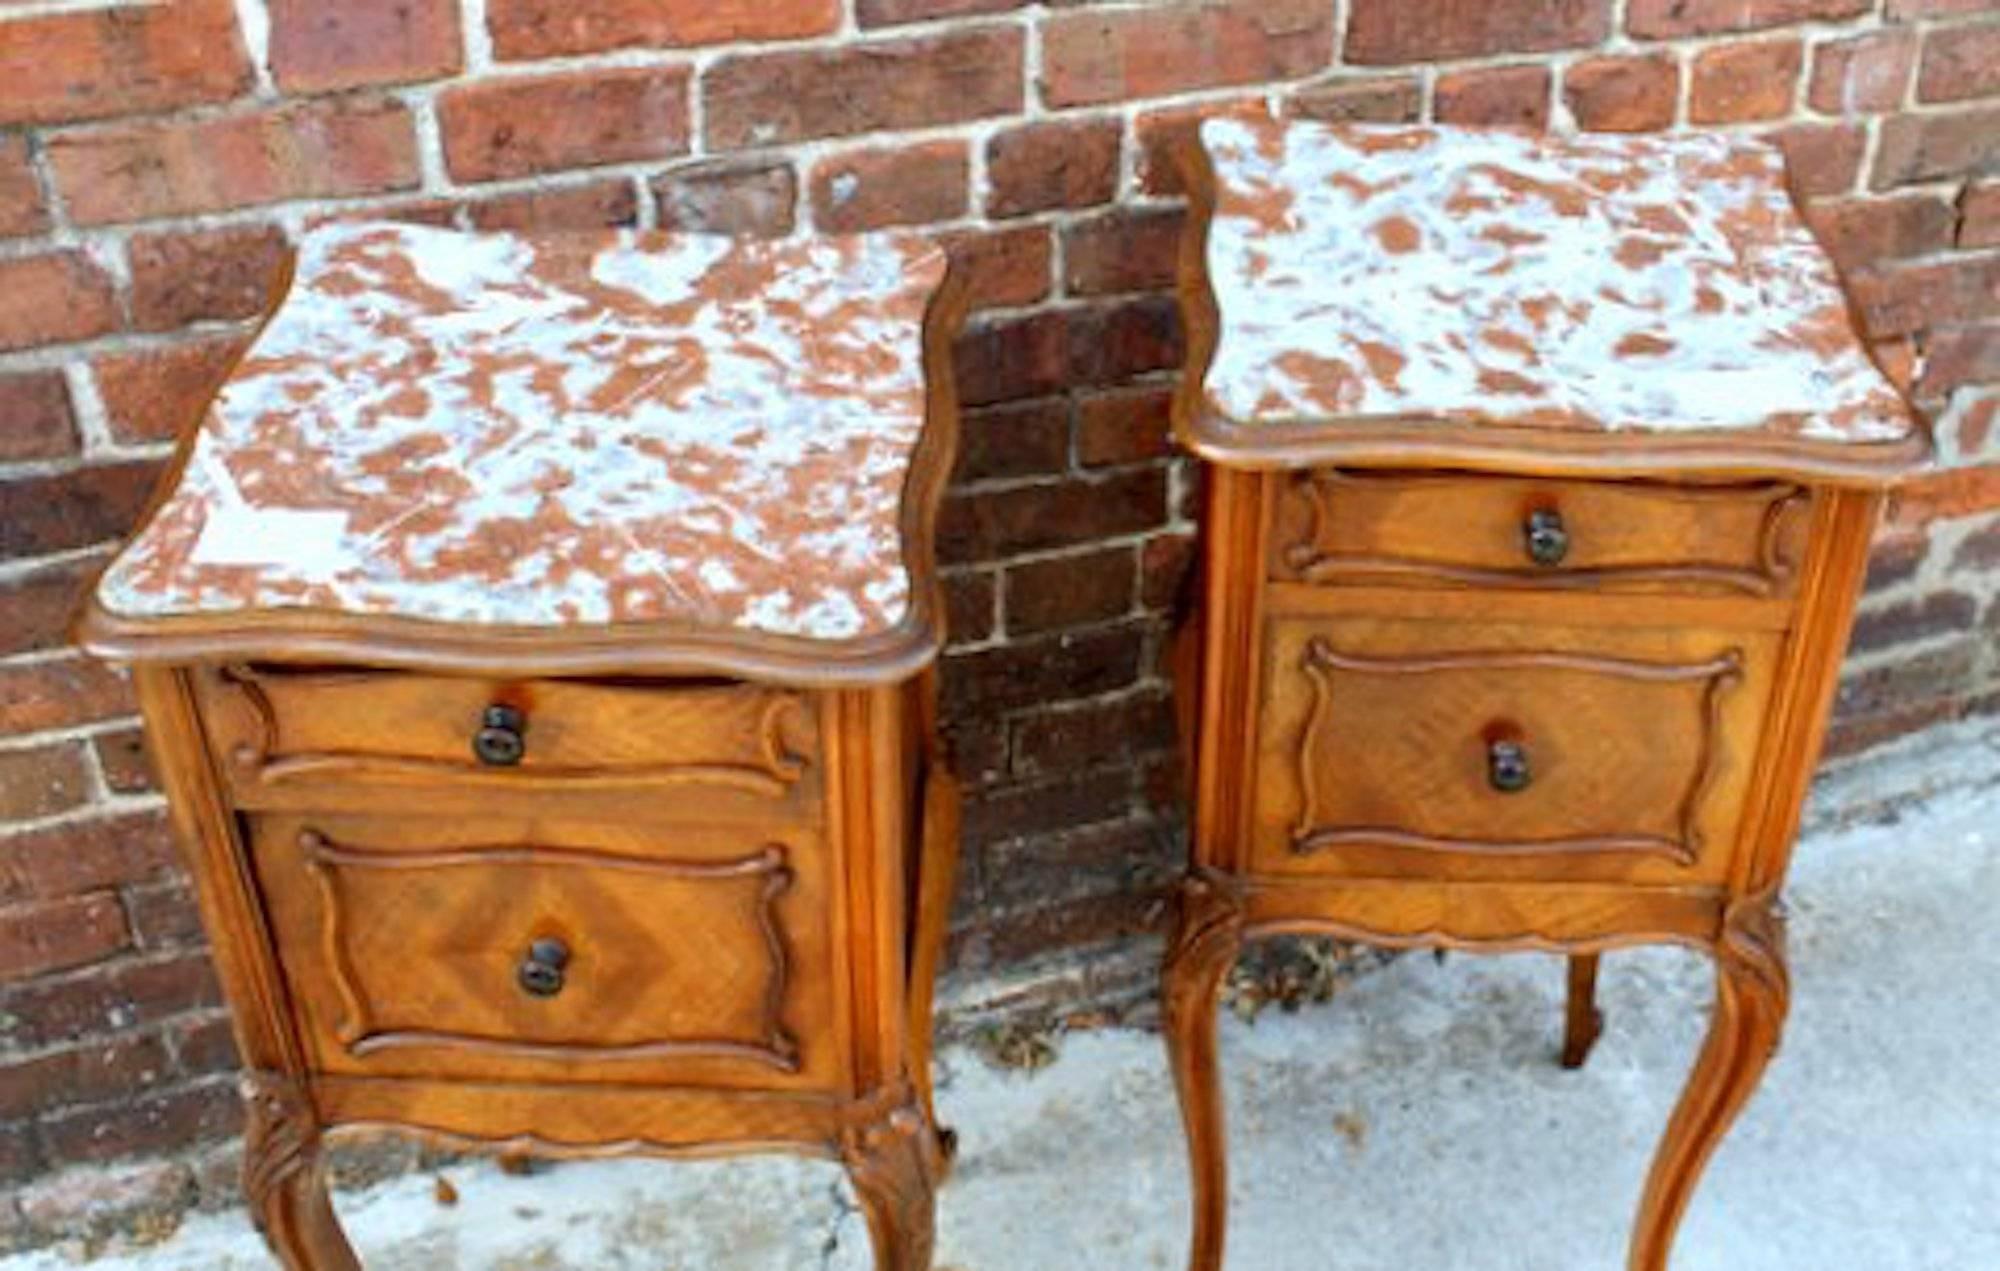 Pair of superb quality antique French parquetry walnut Louis XV style marble top bedside or chairside tables

Please note geometric parquetry walnut and handsome original, pristine marble tops.